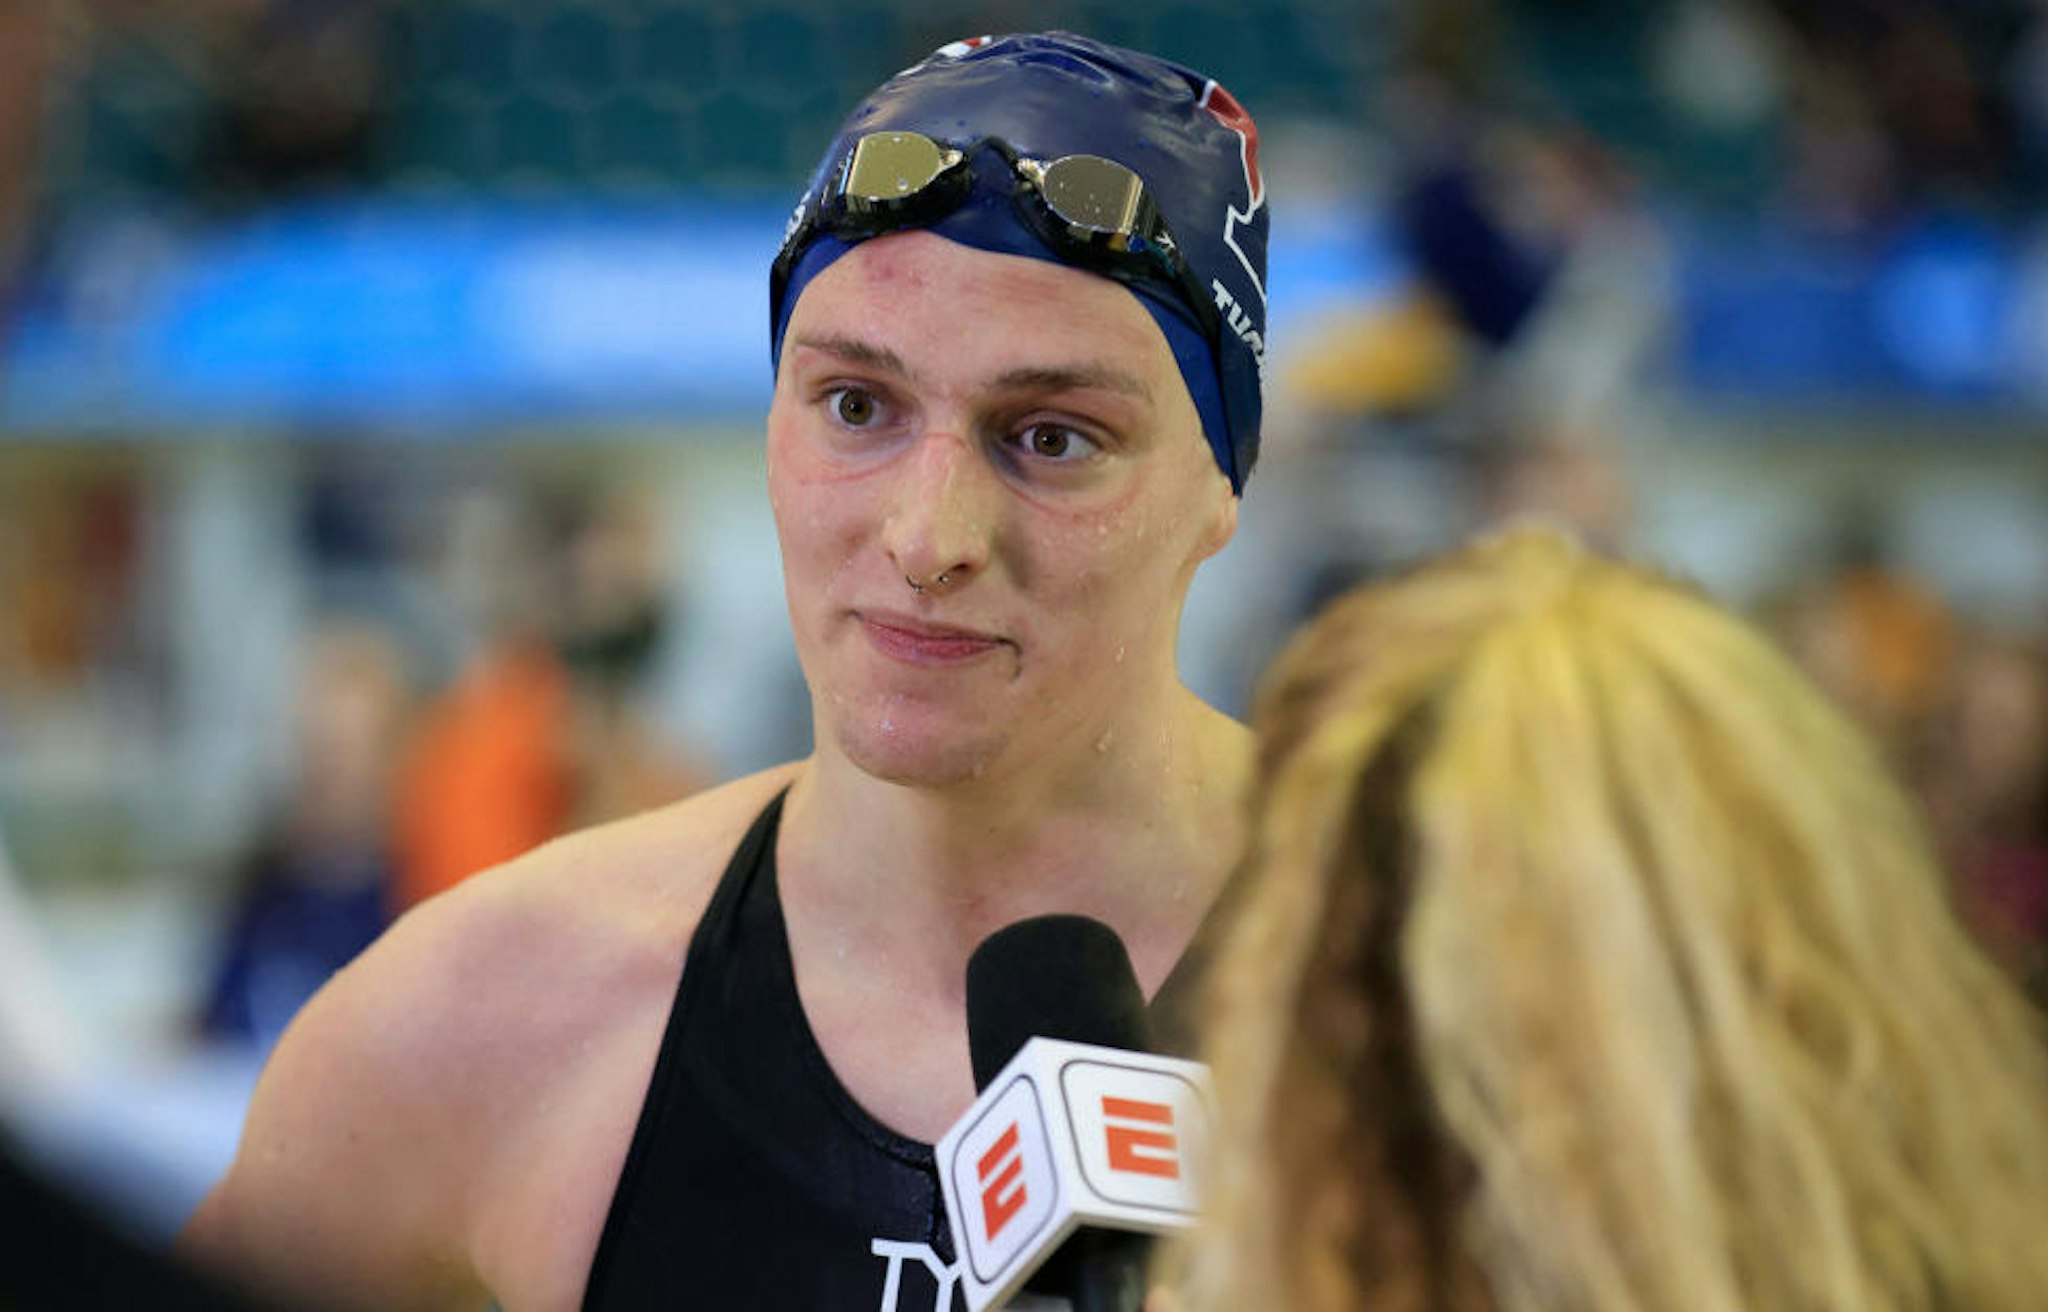 Transgender woman Lia Thomas of the University of Pennsylvania talks to a reporter after winning the 500-yard freestyle at the NCAA Division I Women's Swimming & Diving Championshipon March 17, 2022 in Atlanta, Georgia.